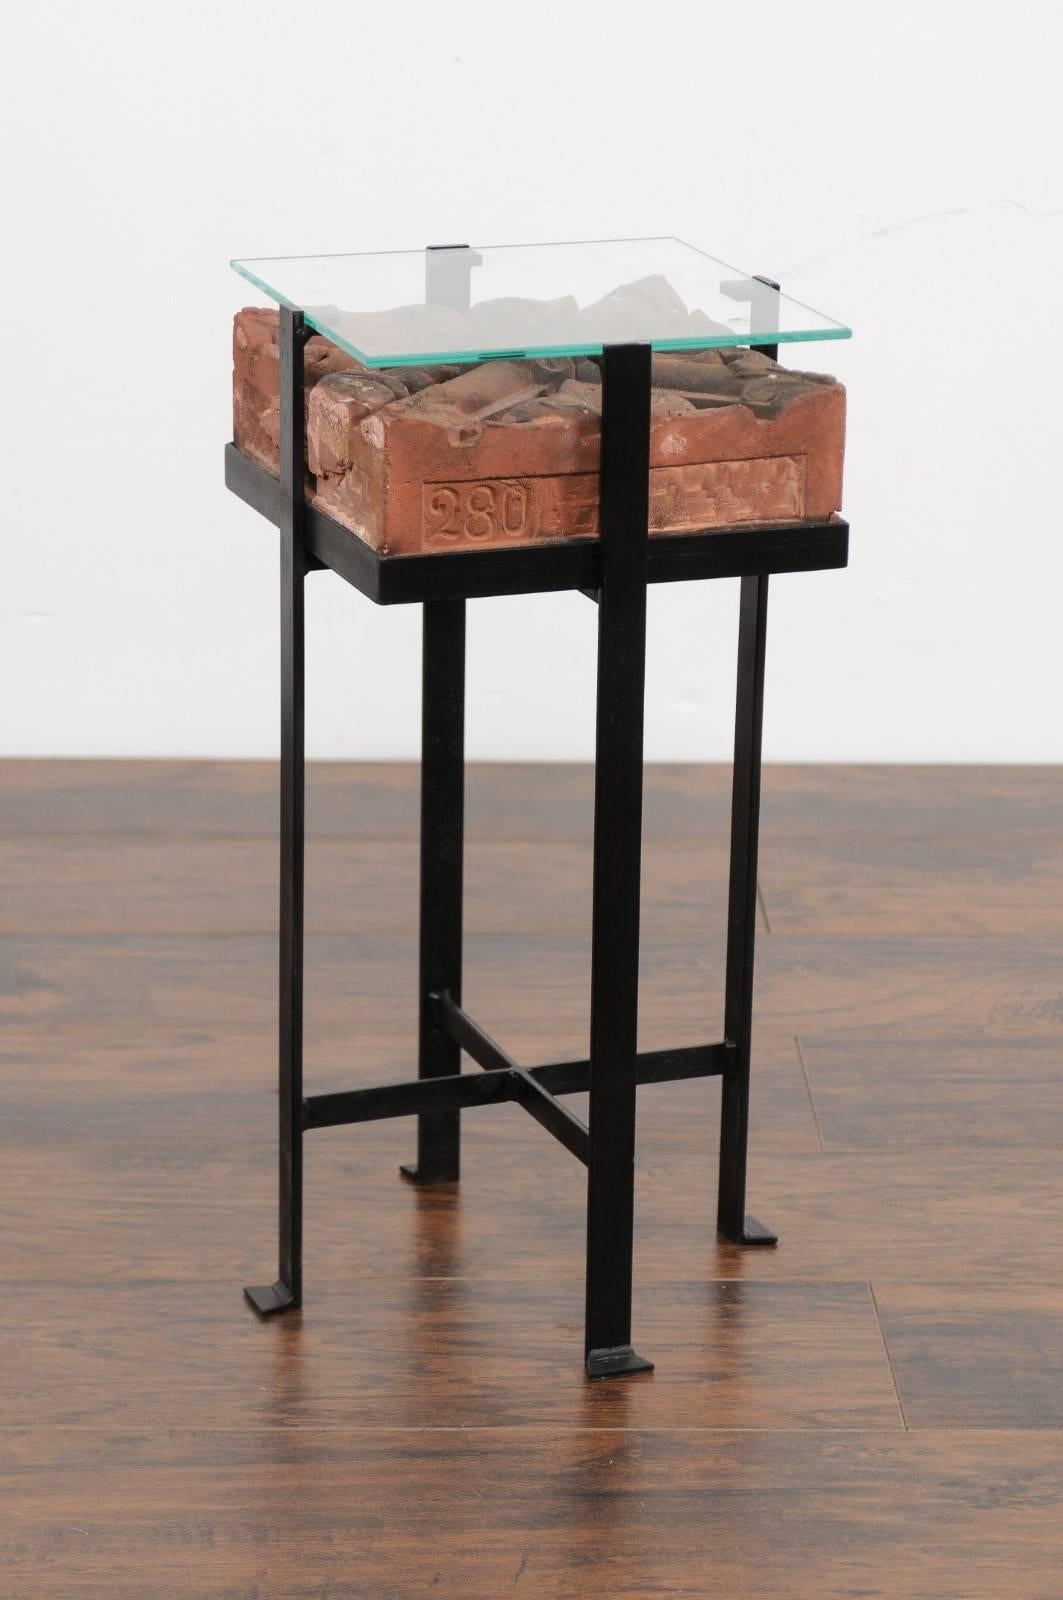 A contemporary side table made of an Italian antique red brick from the early 20th century with glass top and custom iron base. This small side table features a square top made of an antique Italian red brick from the 1900s, adorned with a